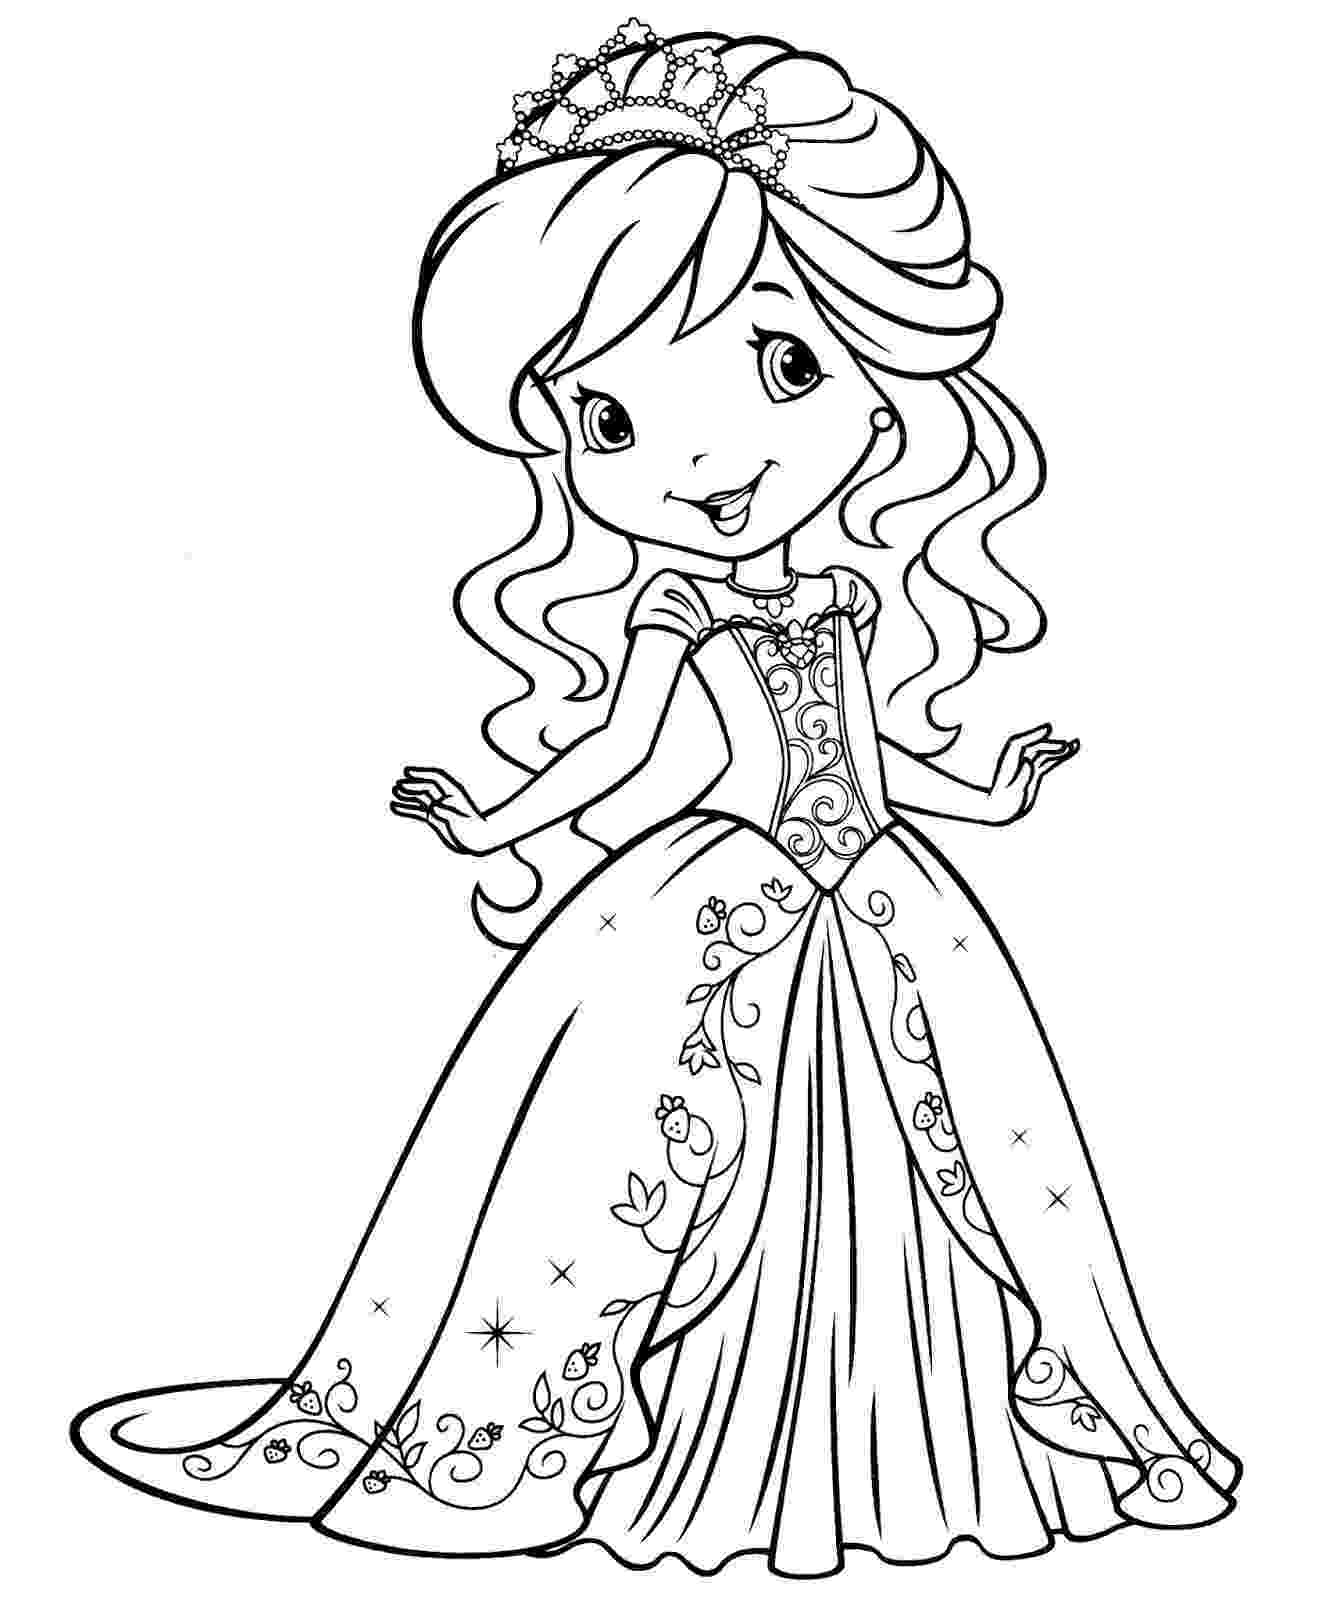 girl colering pages coloring pages for girls best coloring pages for kids colering girl pages 